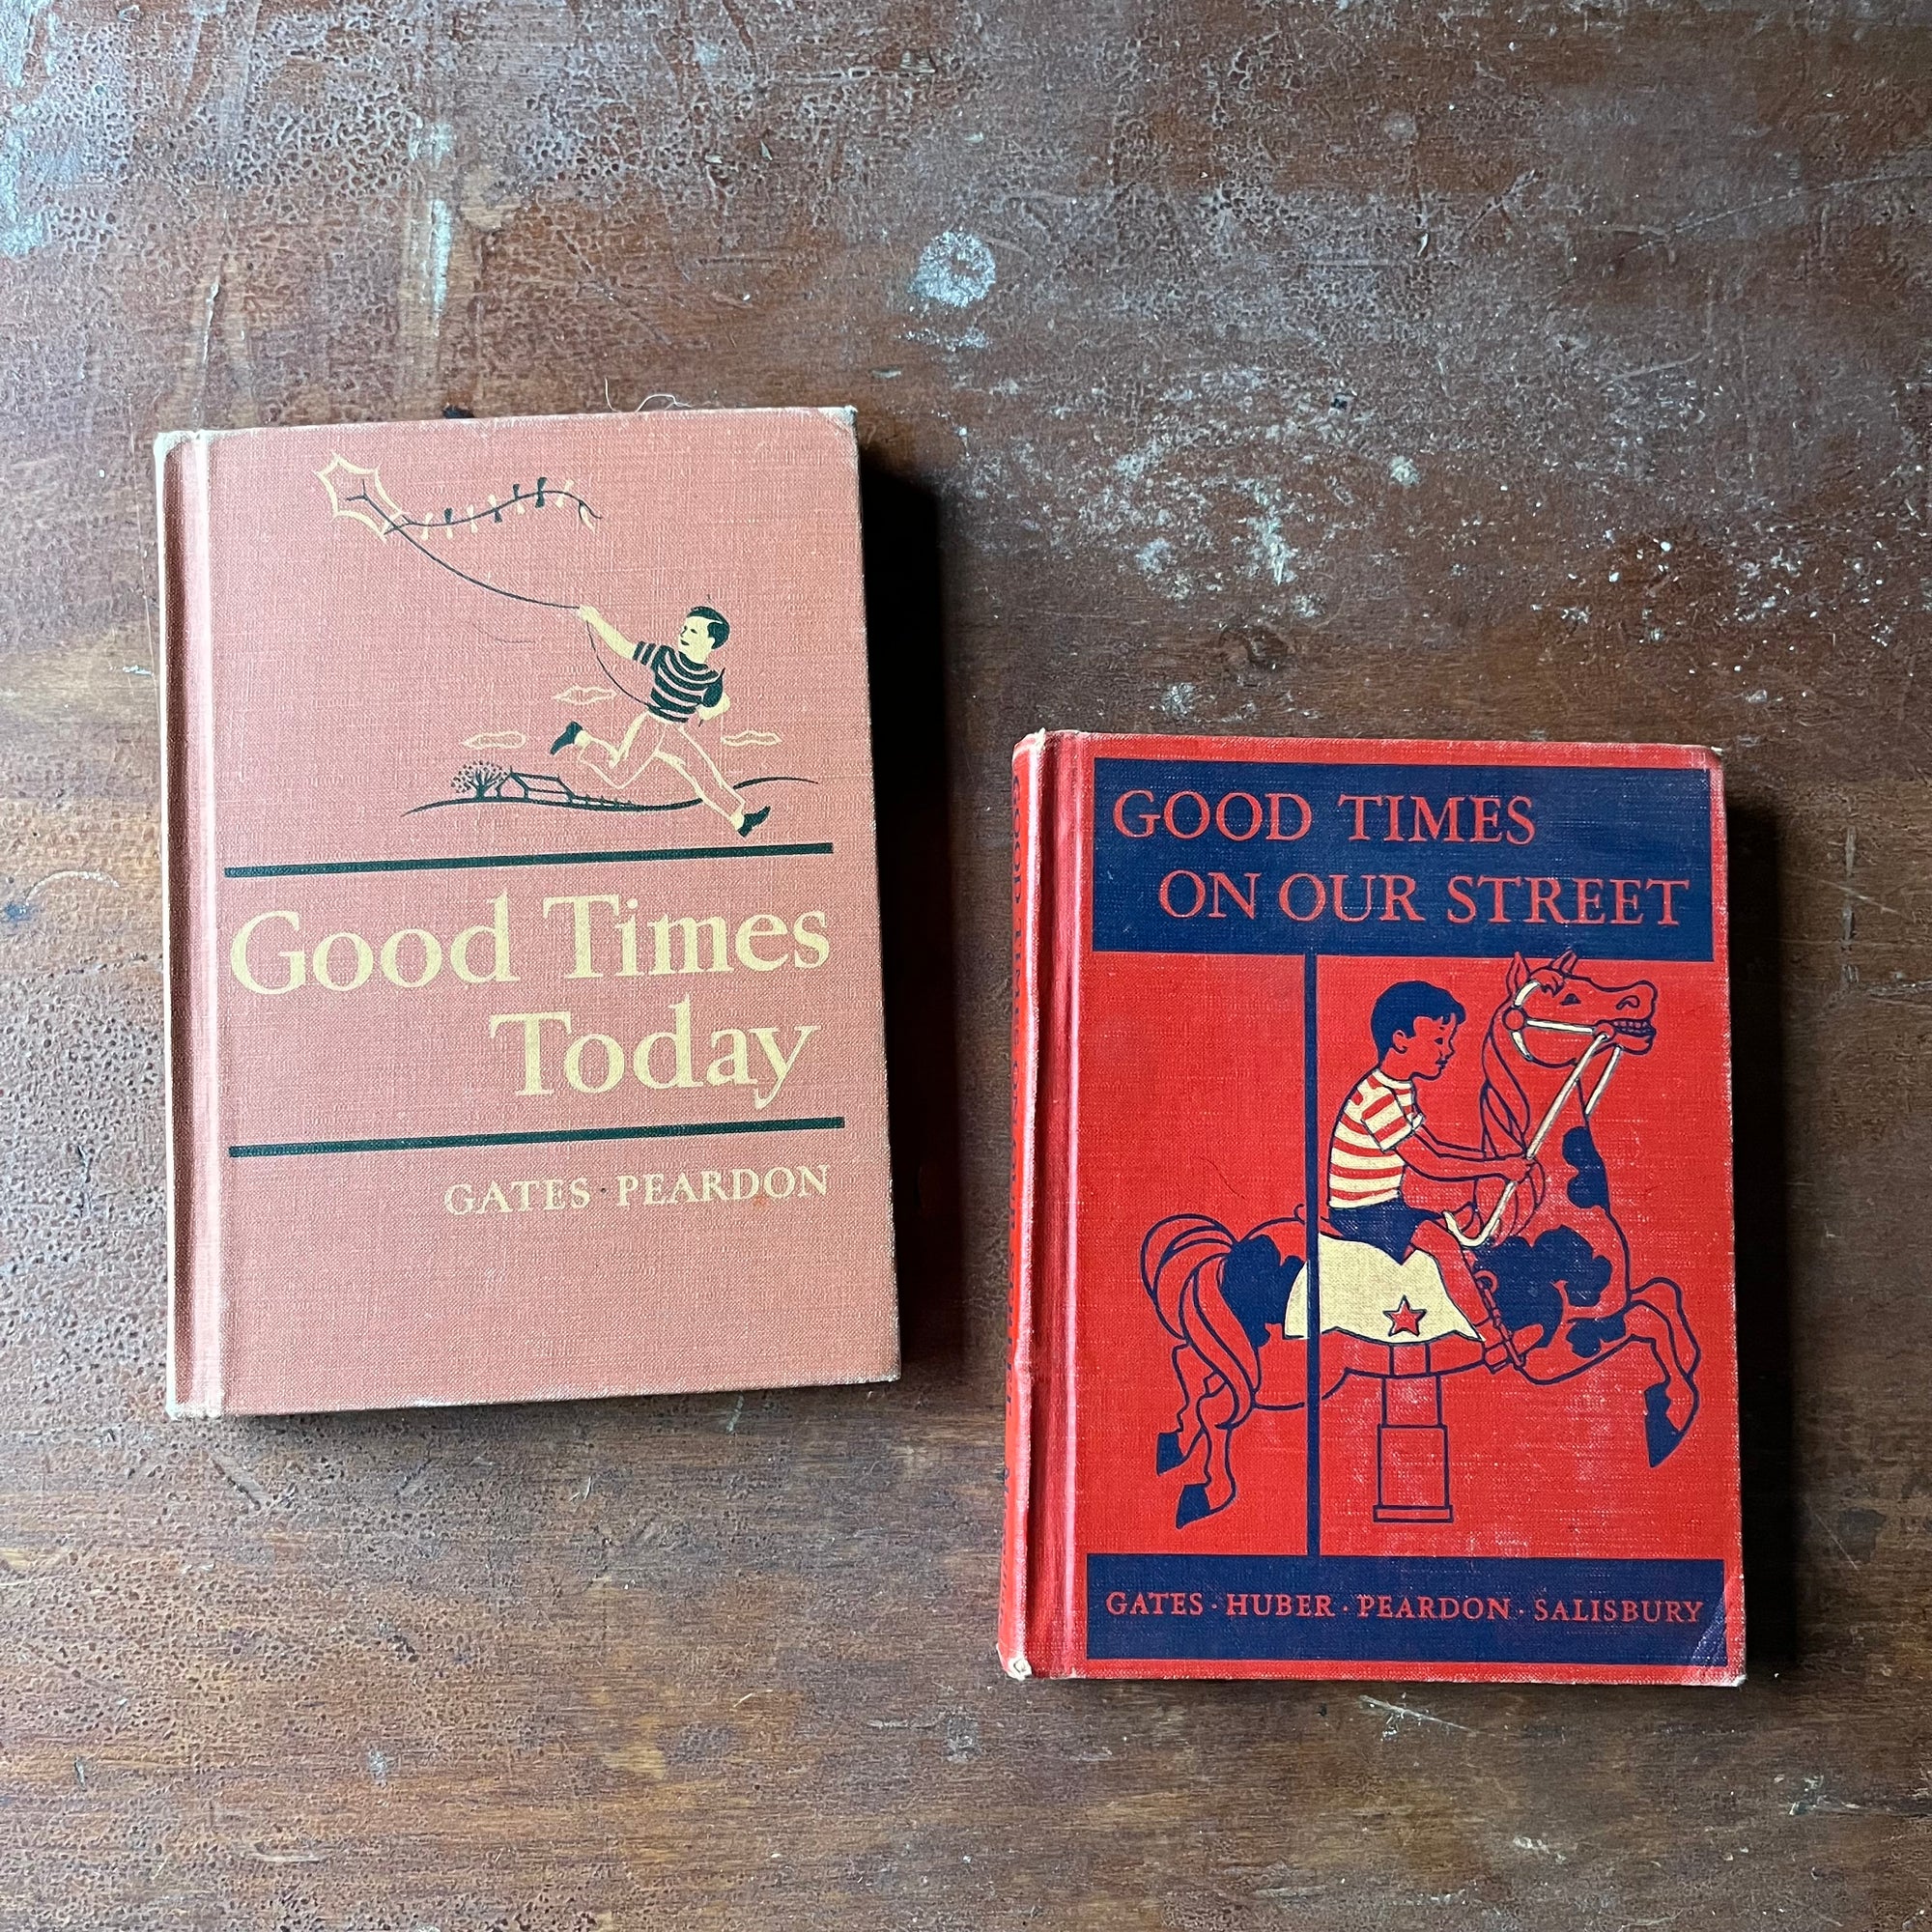 Pair of Today's Work-Play Books-vintage children's schoolbooks-The MacMillan Company-view of the front covers - minor wear noted around the edges